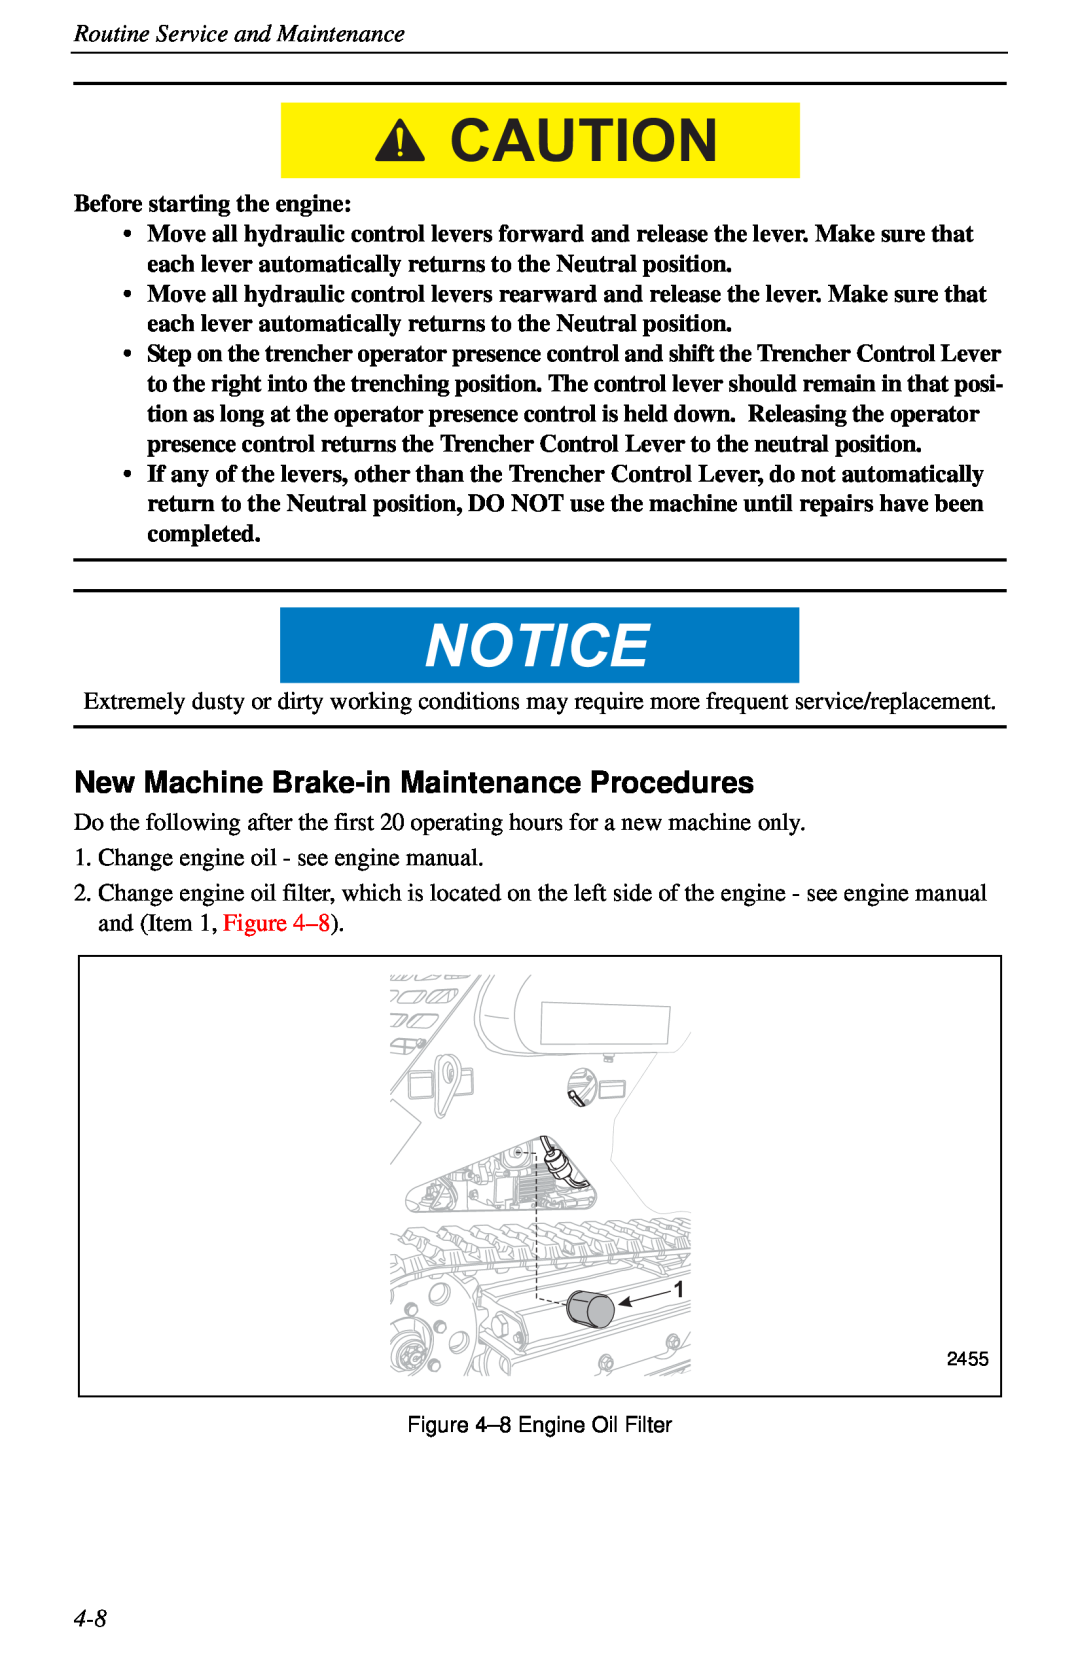 Cellboost 999-823 New Machine Brake-in Maintenance Procedures, Routine Service and Maintenance, Before starting the engine 